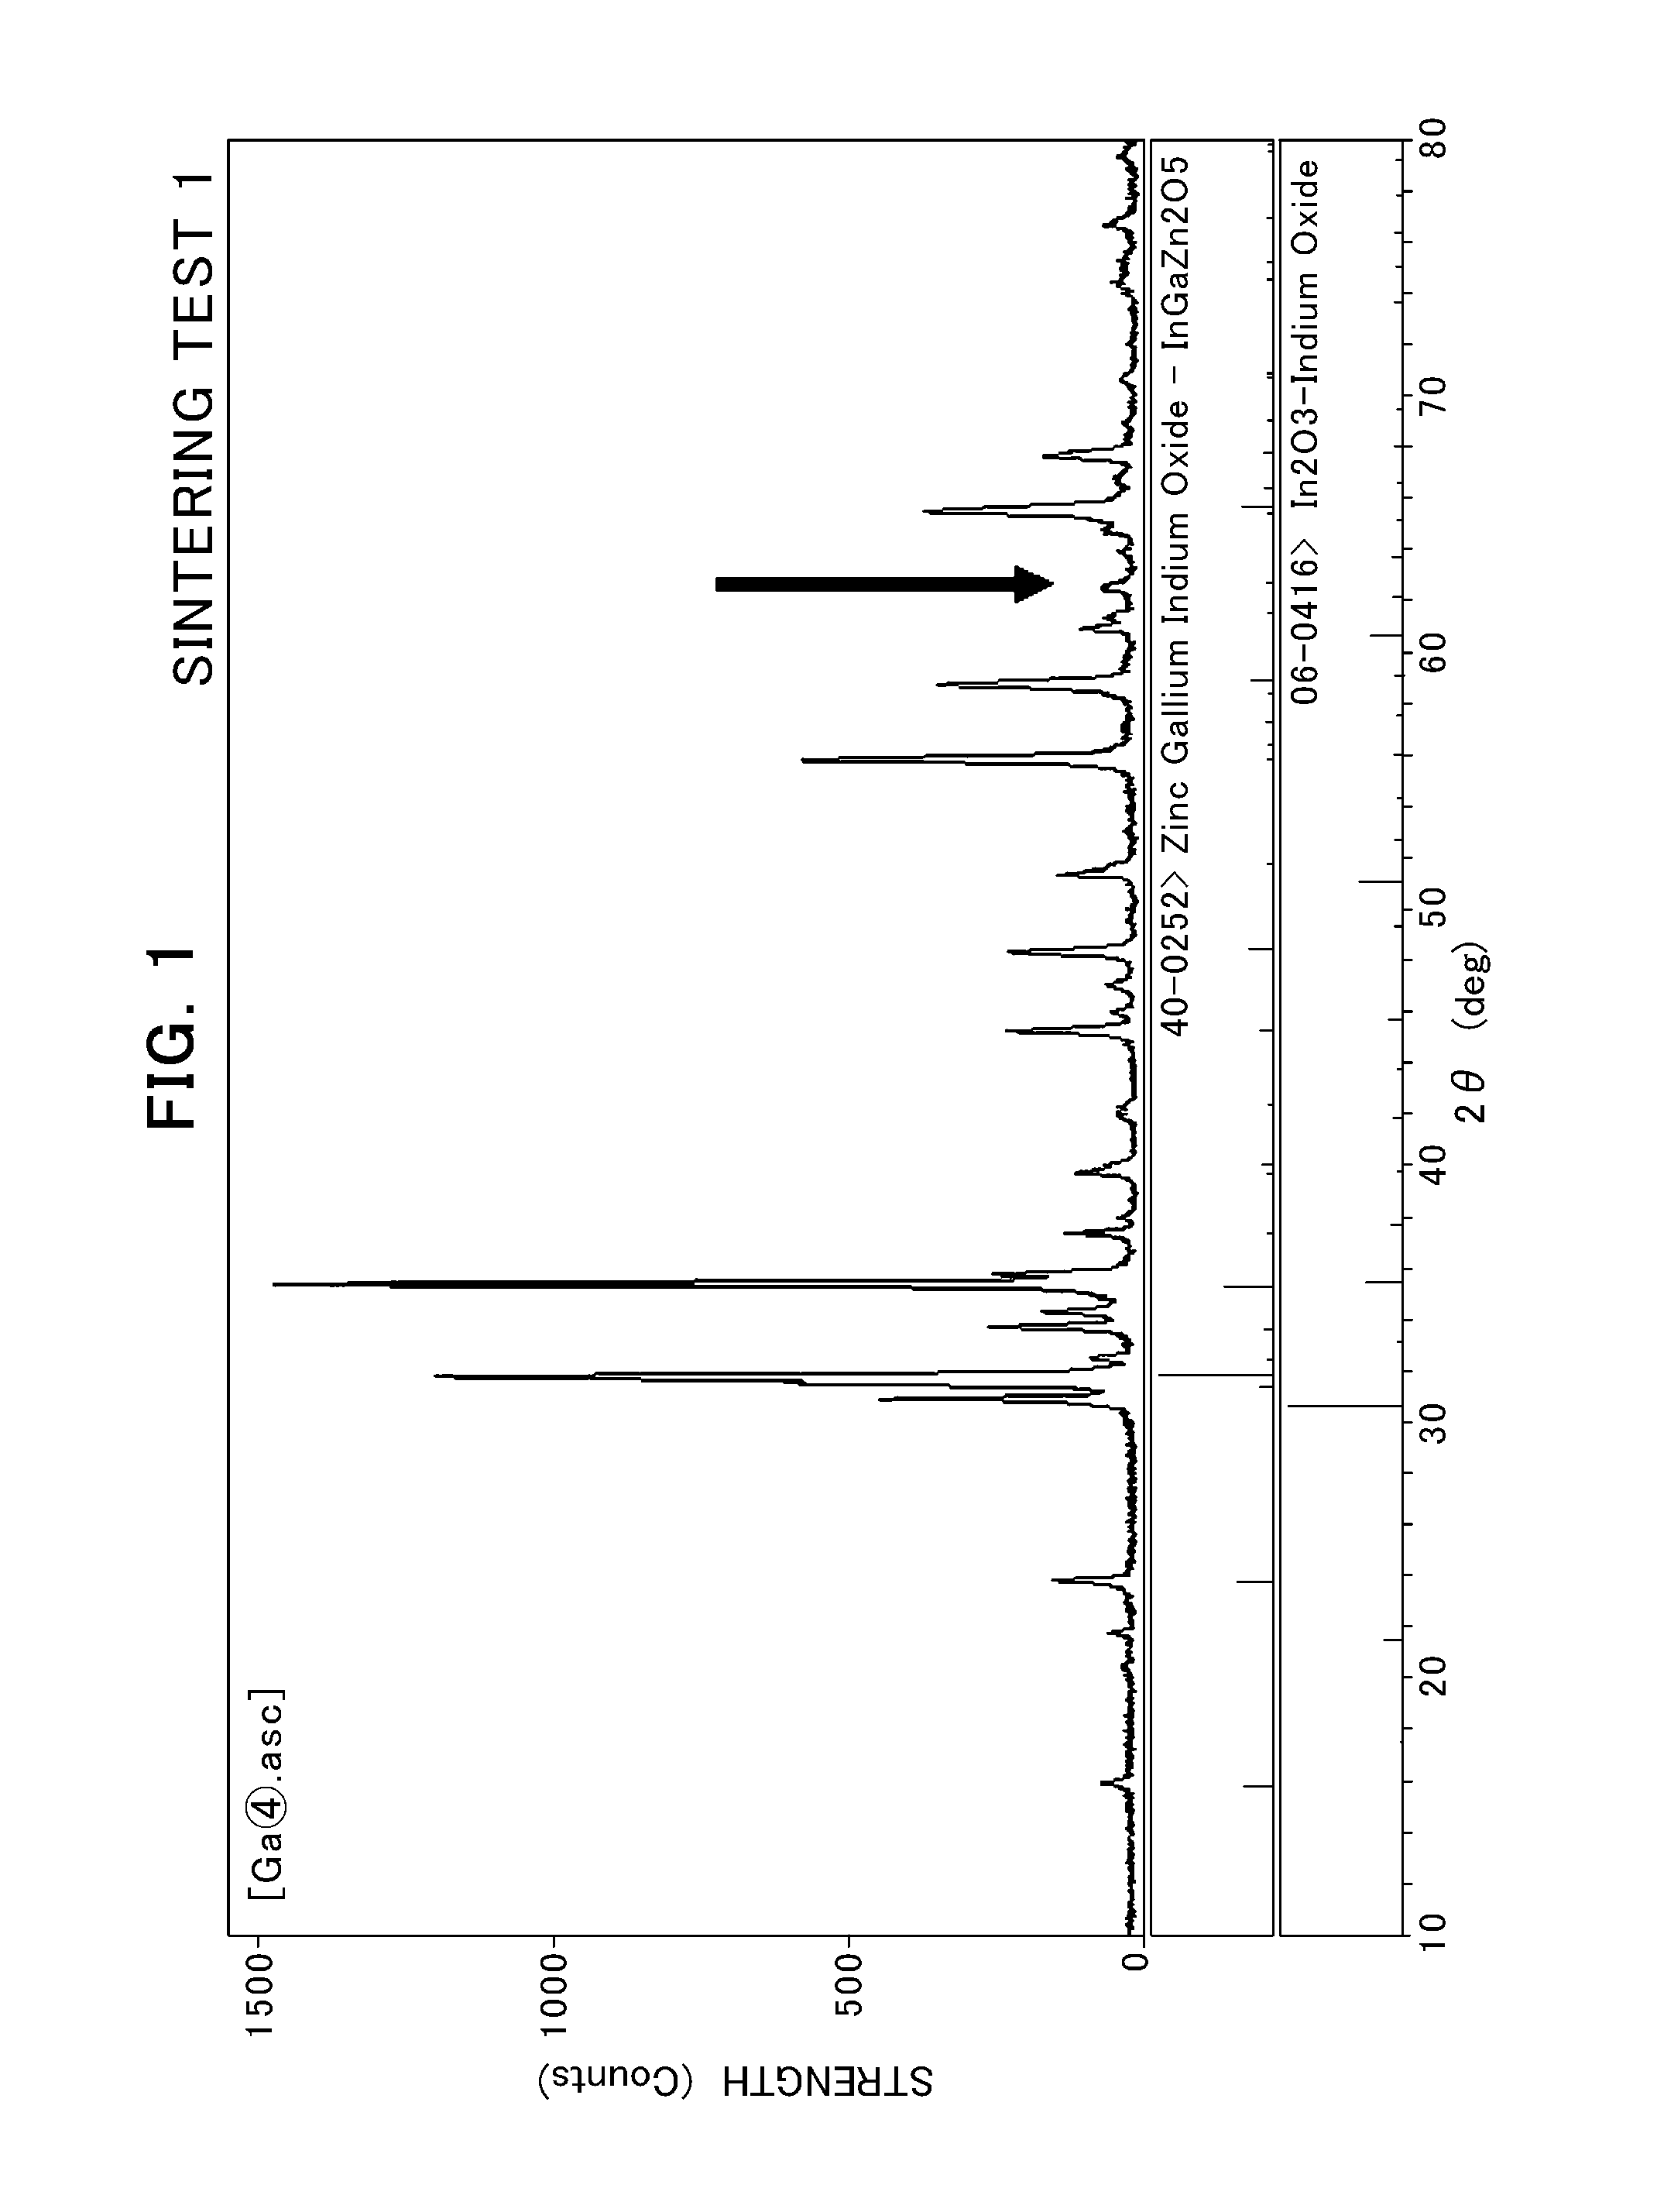 SPUTTERING TARGET FOR OXIDE SEMICONDUCTOR, COMPRISING InGaO3(ZnO) CRYSTAL PHASE AND PROCESS FOR PRODUCING THE SPUTTERING TARGET